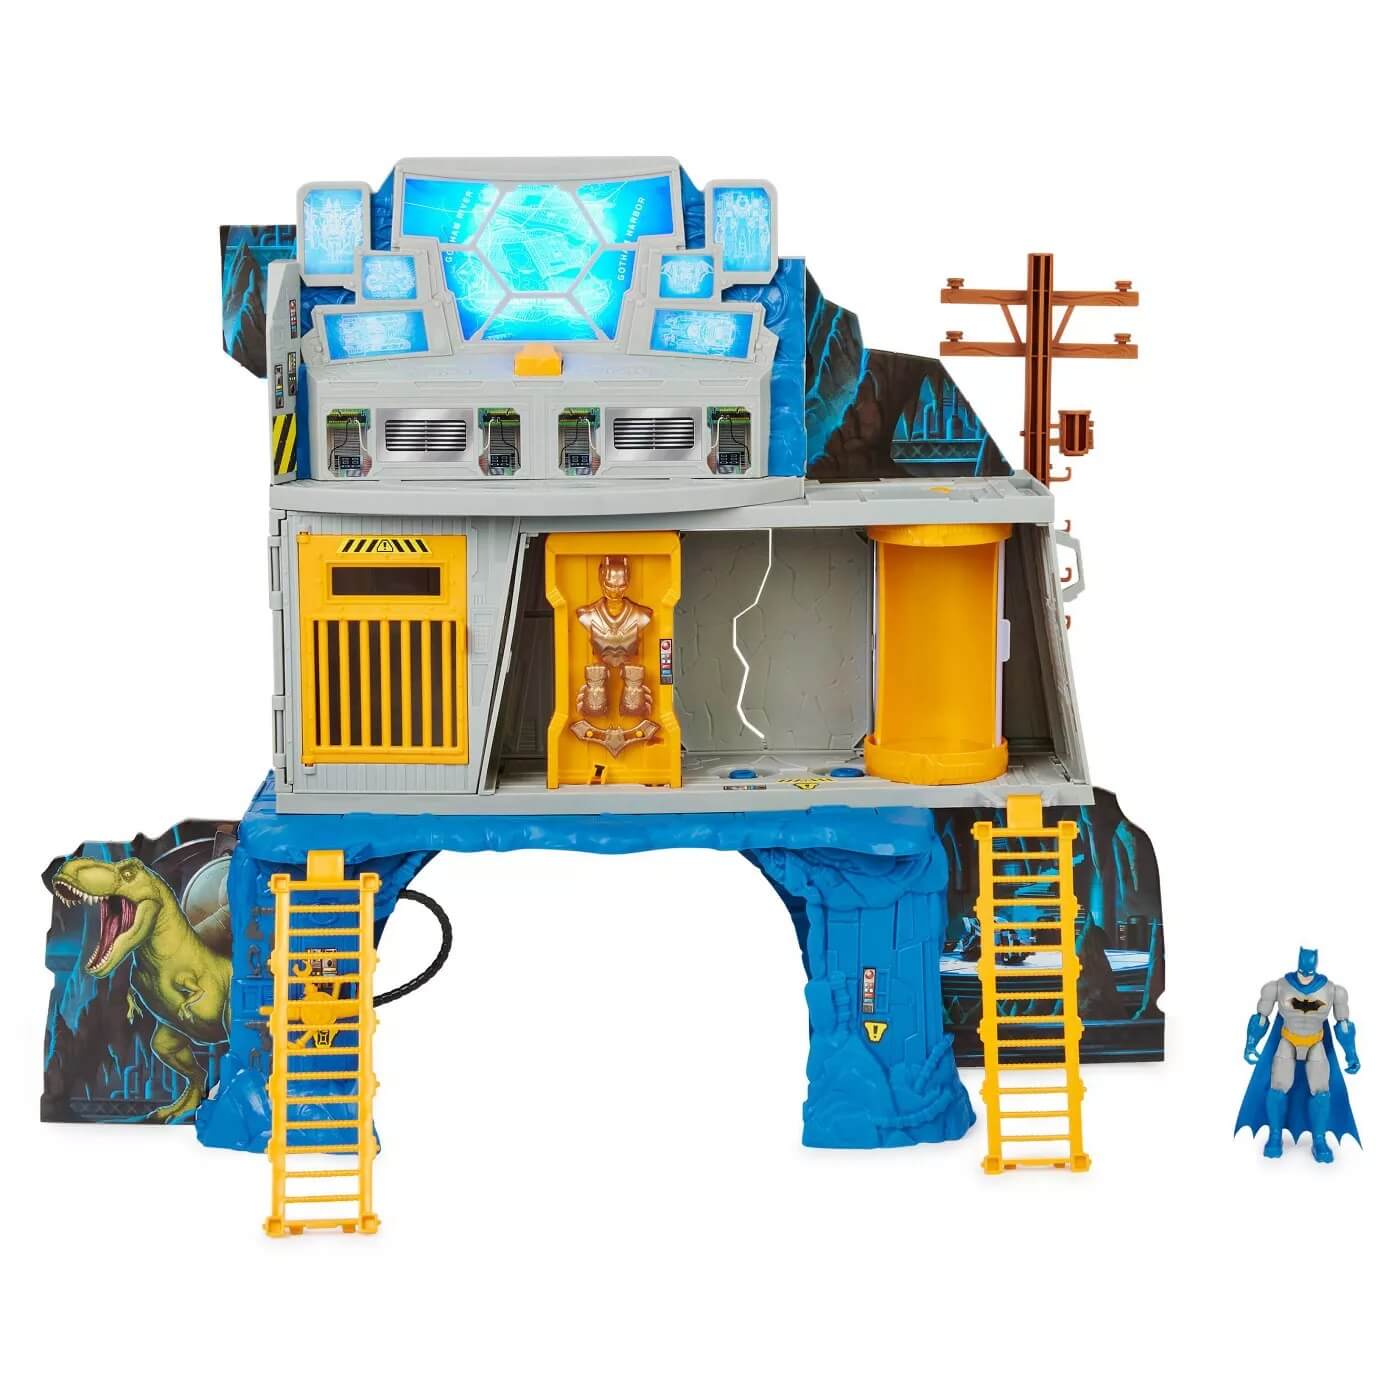 DC Creature Chaos The Caped Crusader 3-in-1 Batcave Playset